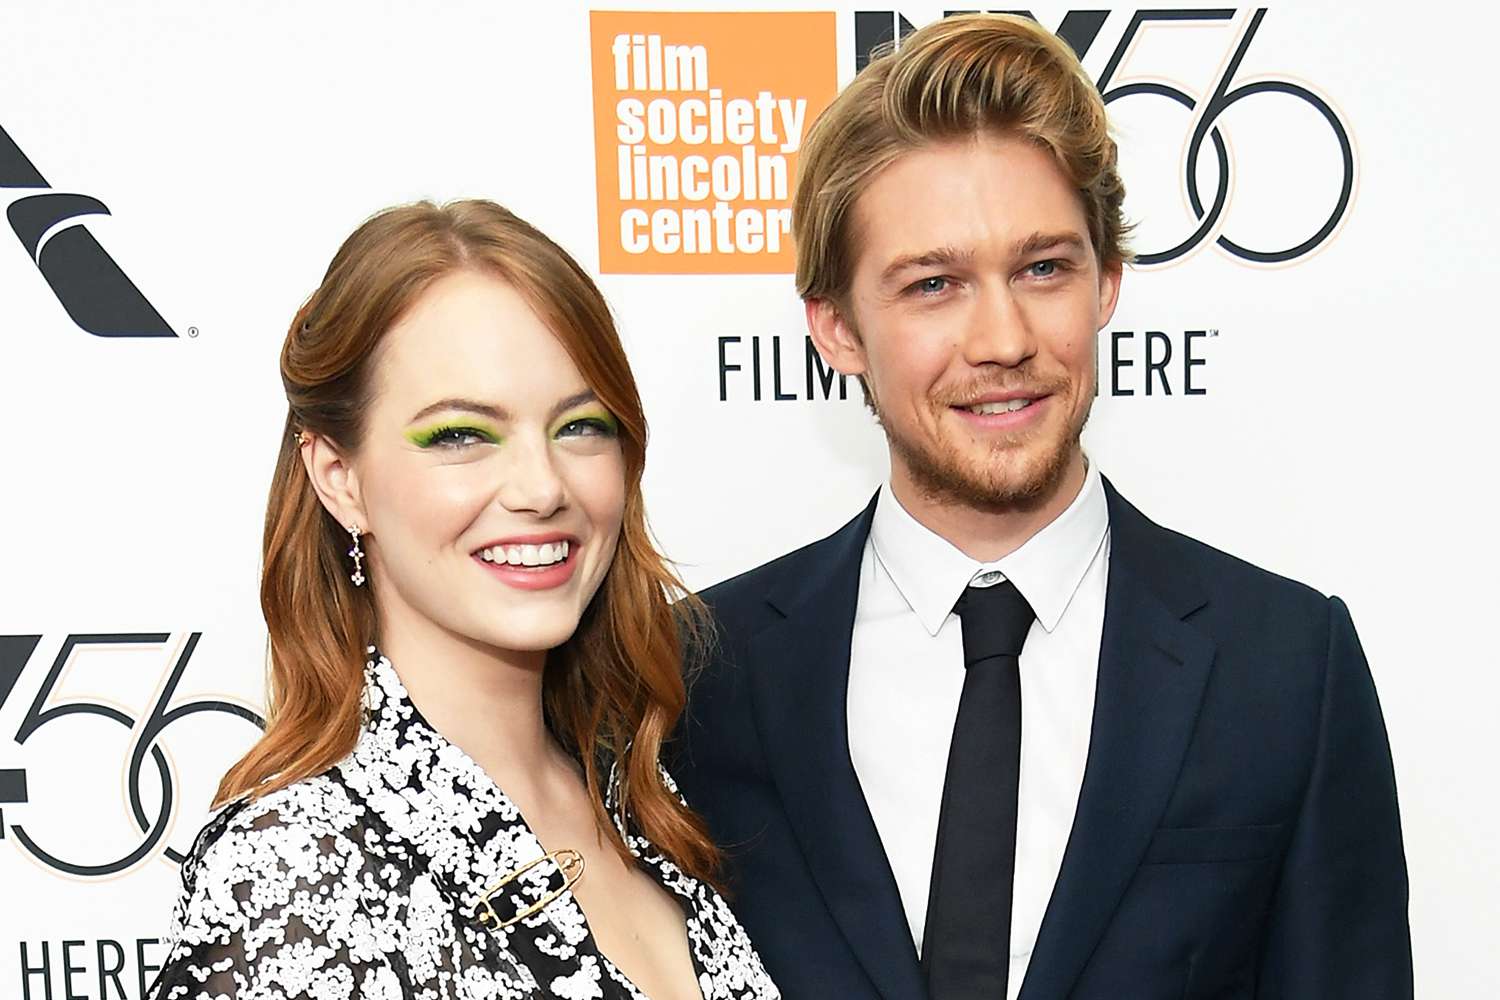 Emma Stone Calls Pal Taylor Swift's Ex Joe Alwyn 'One of the Sweetest People You'll Ever Meet'